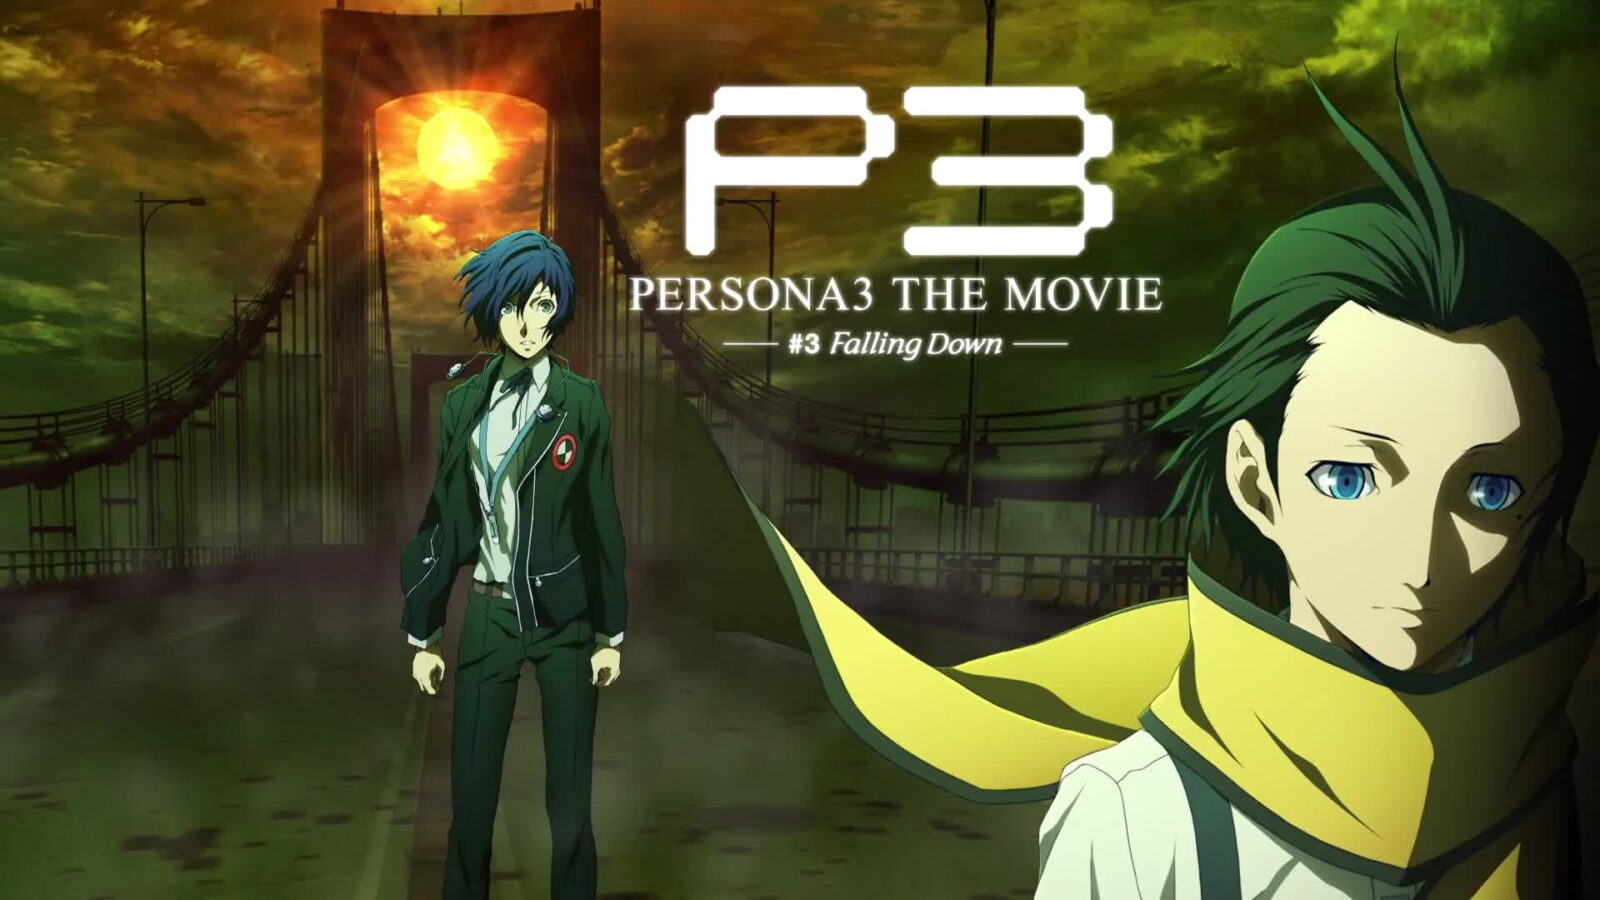 persona 3 the movie 3 falling down download link